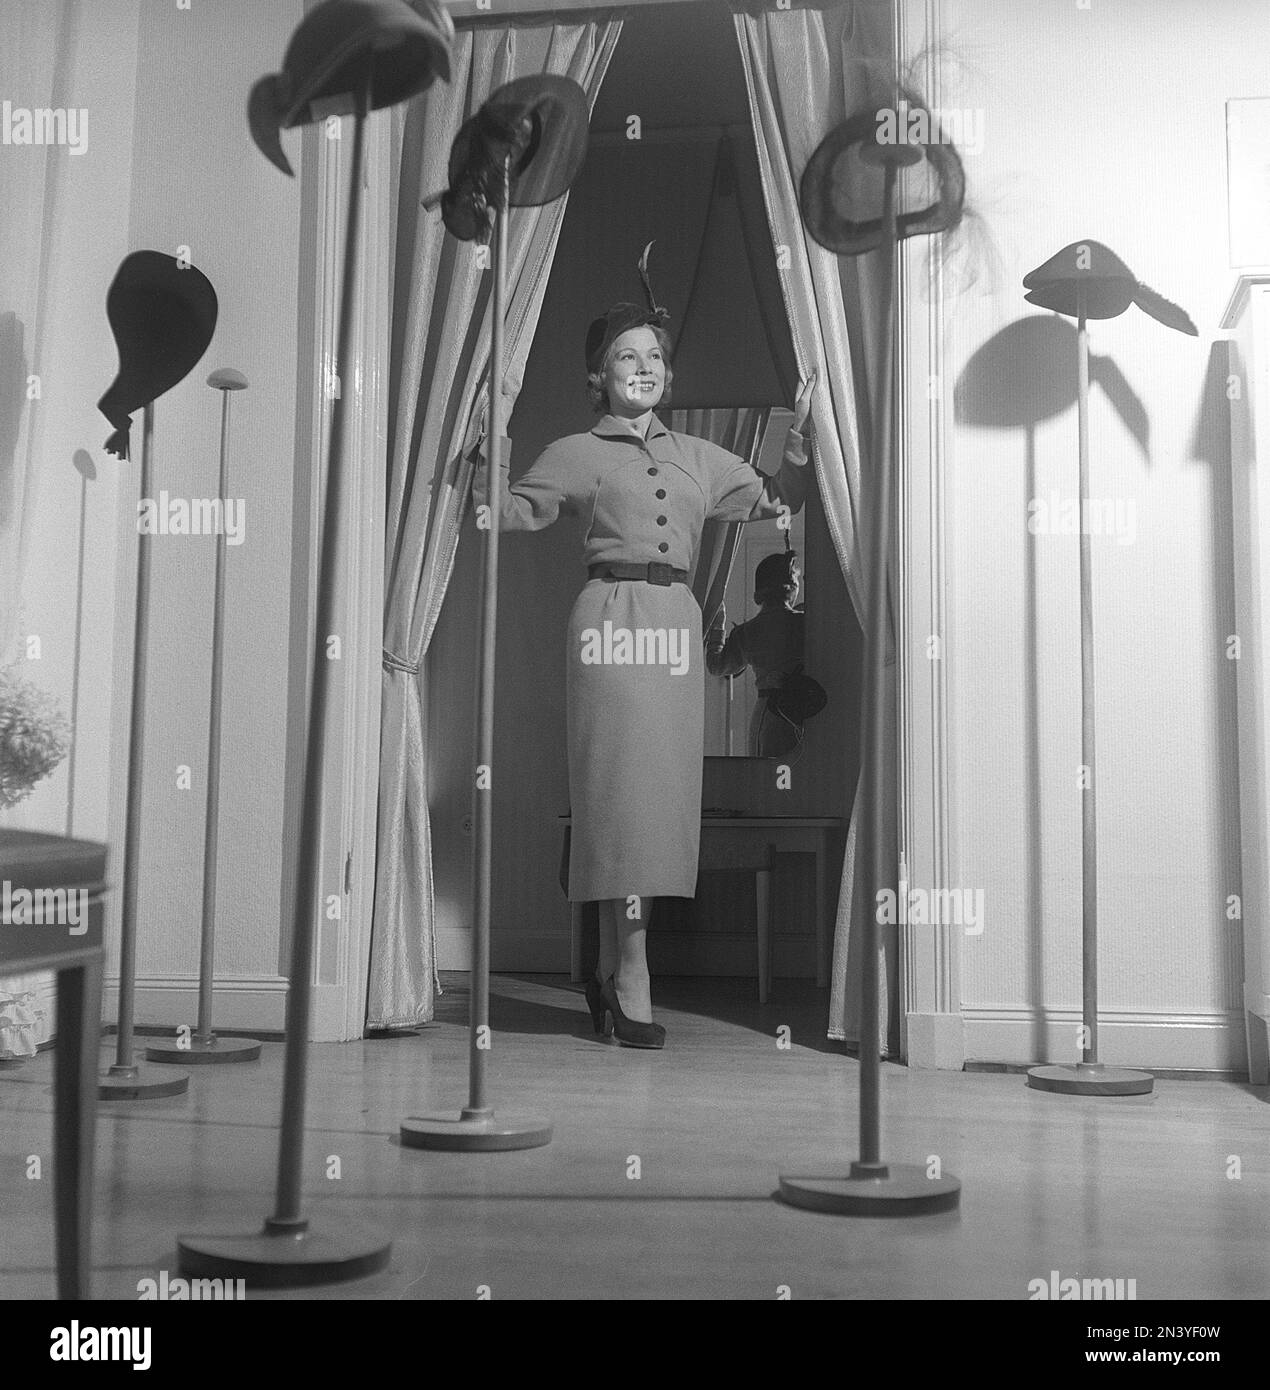 Women's fashion in the 1940s. A young woman in the opening of the fitting room wearing a typical 1940s outfit with a matching hat. In front of her are different hats mounted on stands. Sweden 1949 Kristoffersson ref AT37-4 Stock Photo